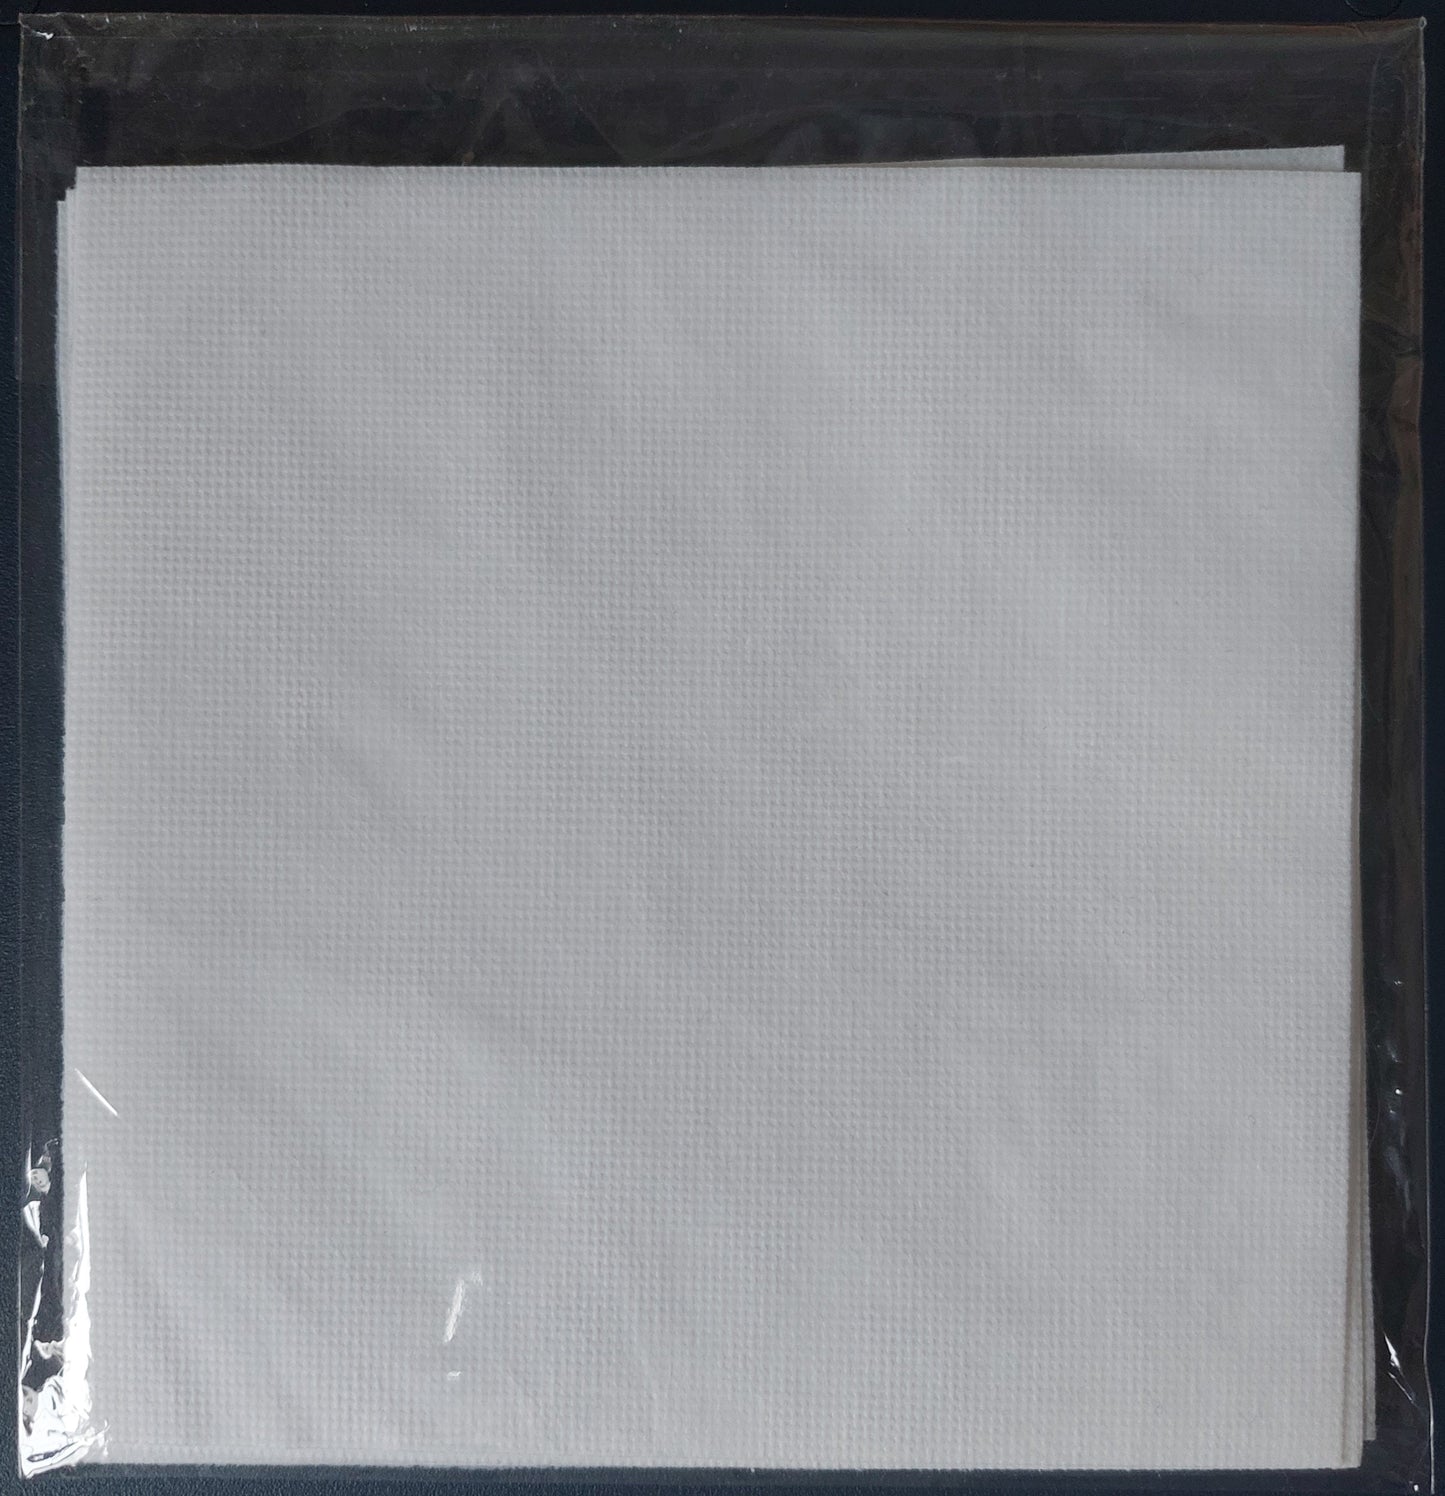 100 Japanese Non-woven Fabric Inners for CD/DVD/UHD/BD